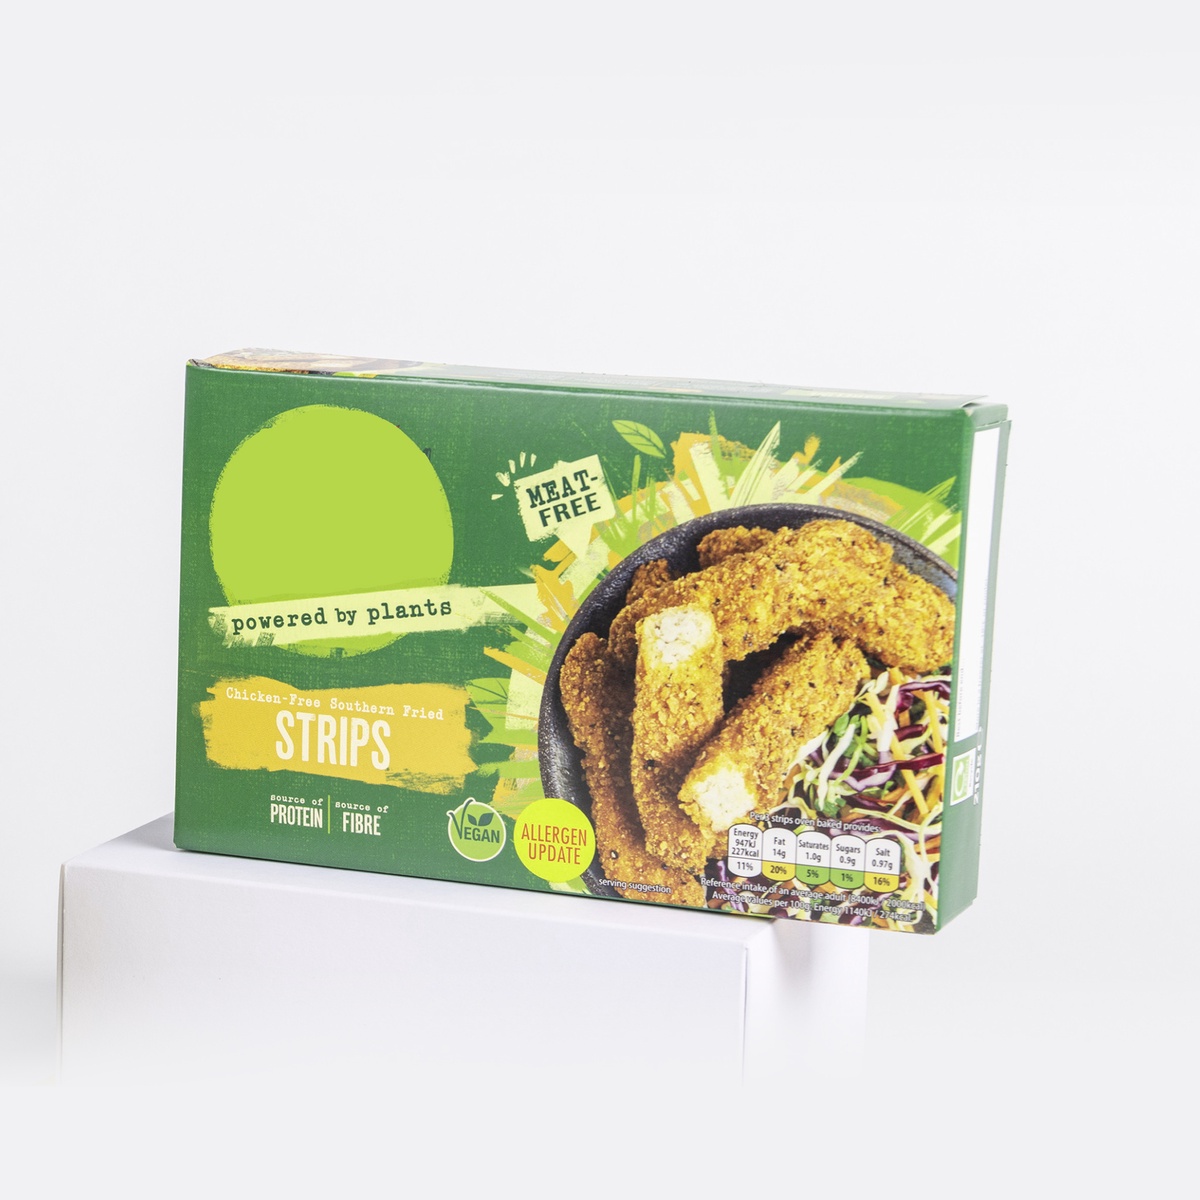 Boxproof's Custom Frozen Food Boxes Wholesale in the USA: Quality, Affordability, and Options Galore